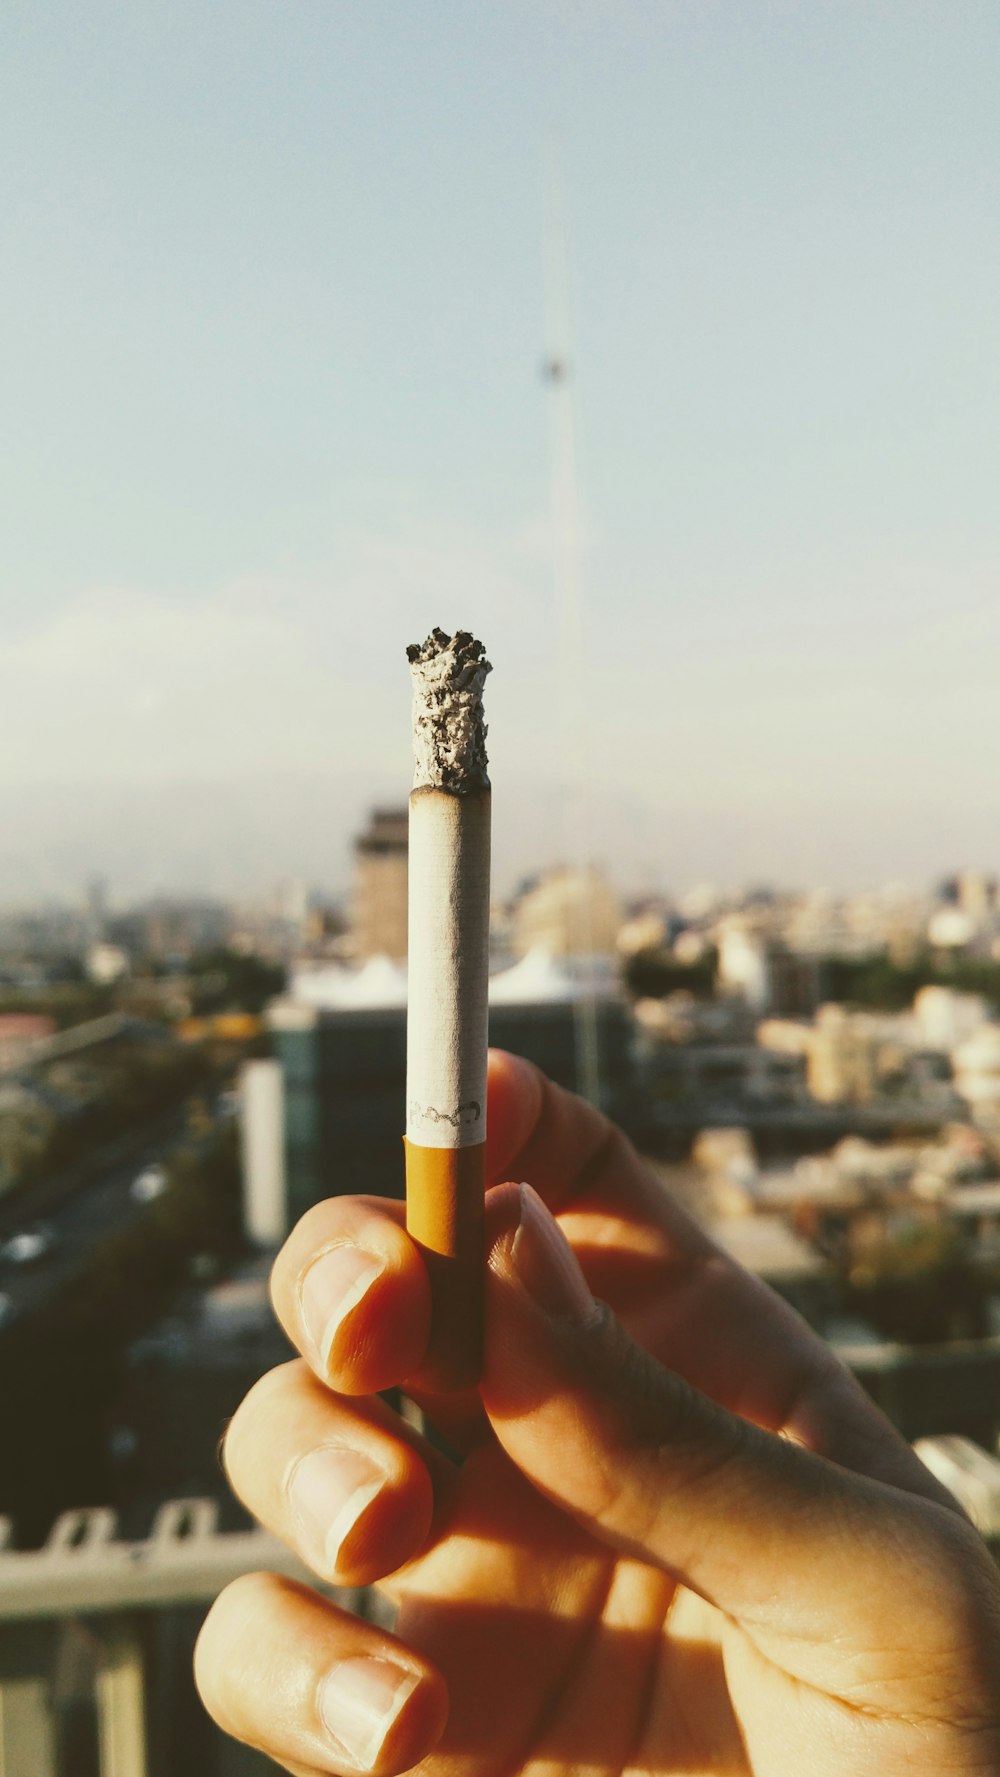 Smoking Pictures Download Free Images On Unsplash You can save these images directly on to your phone or system and use them. smoking pictures download free images